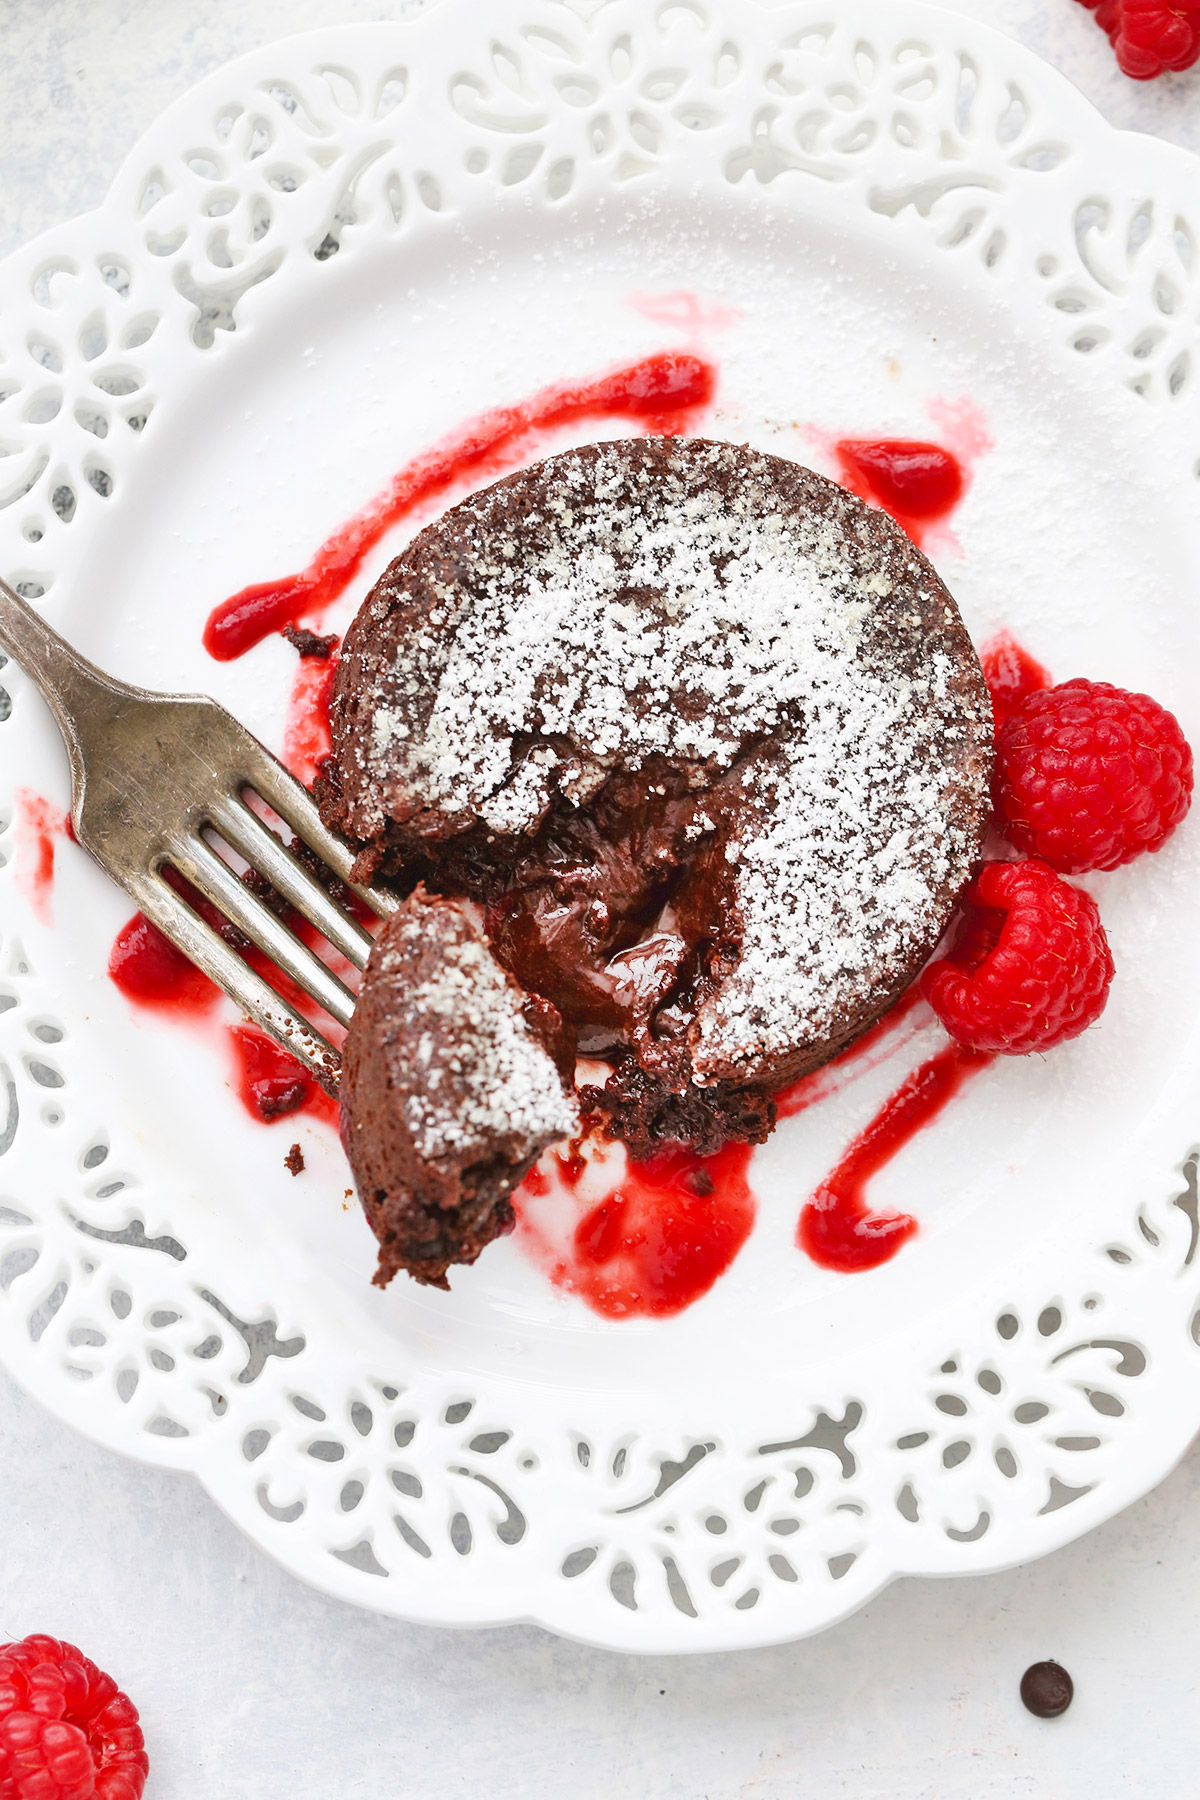 Paleo Chocolate Lava Cake from One Lovely Life